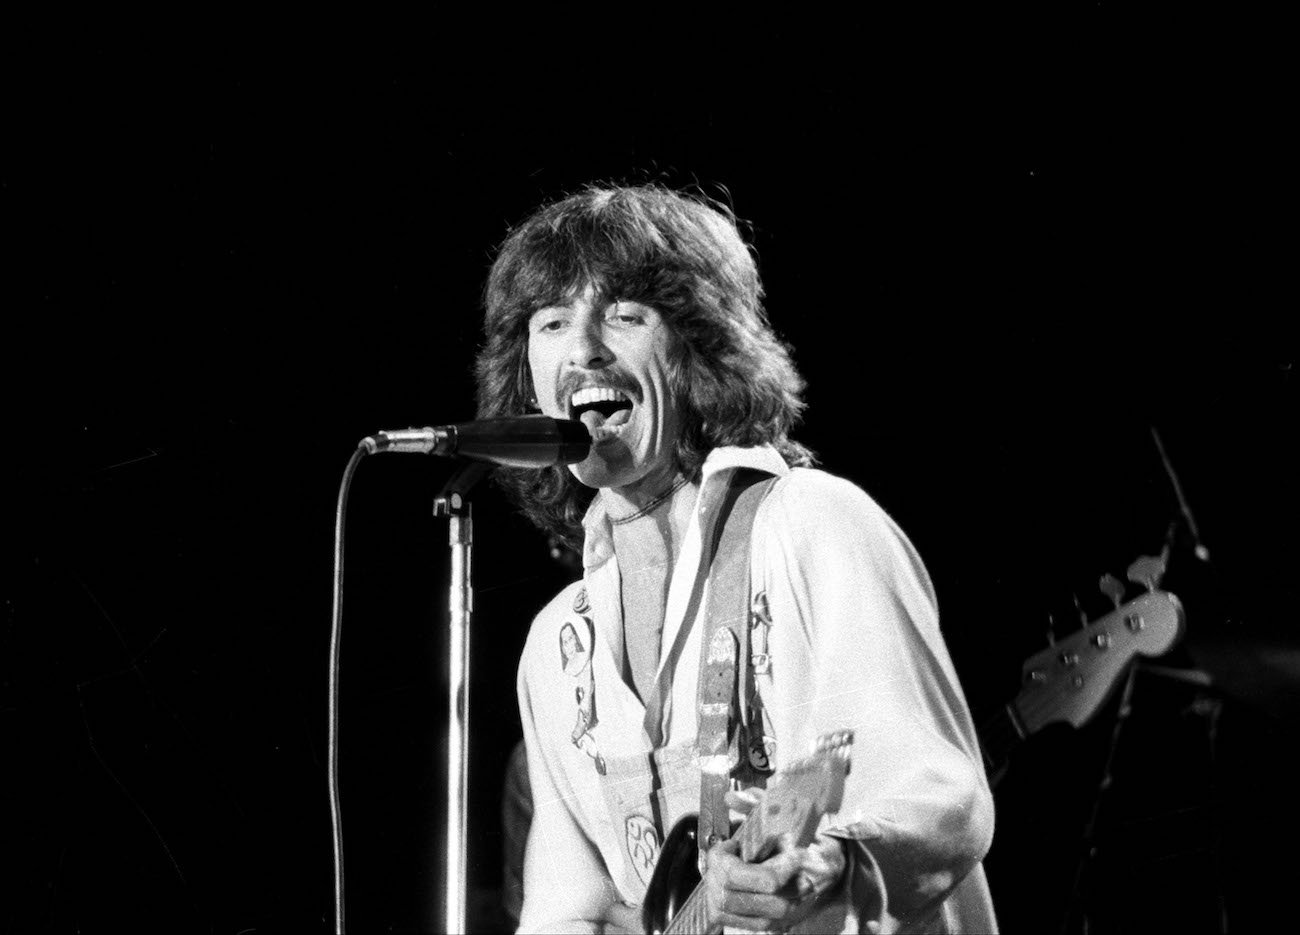 George Harrison performing in white in the 1970s.